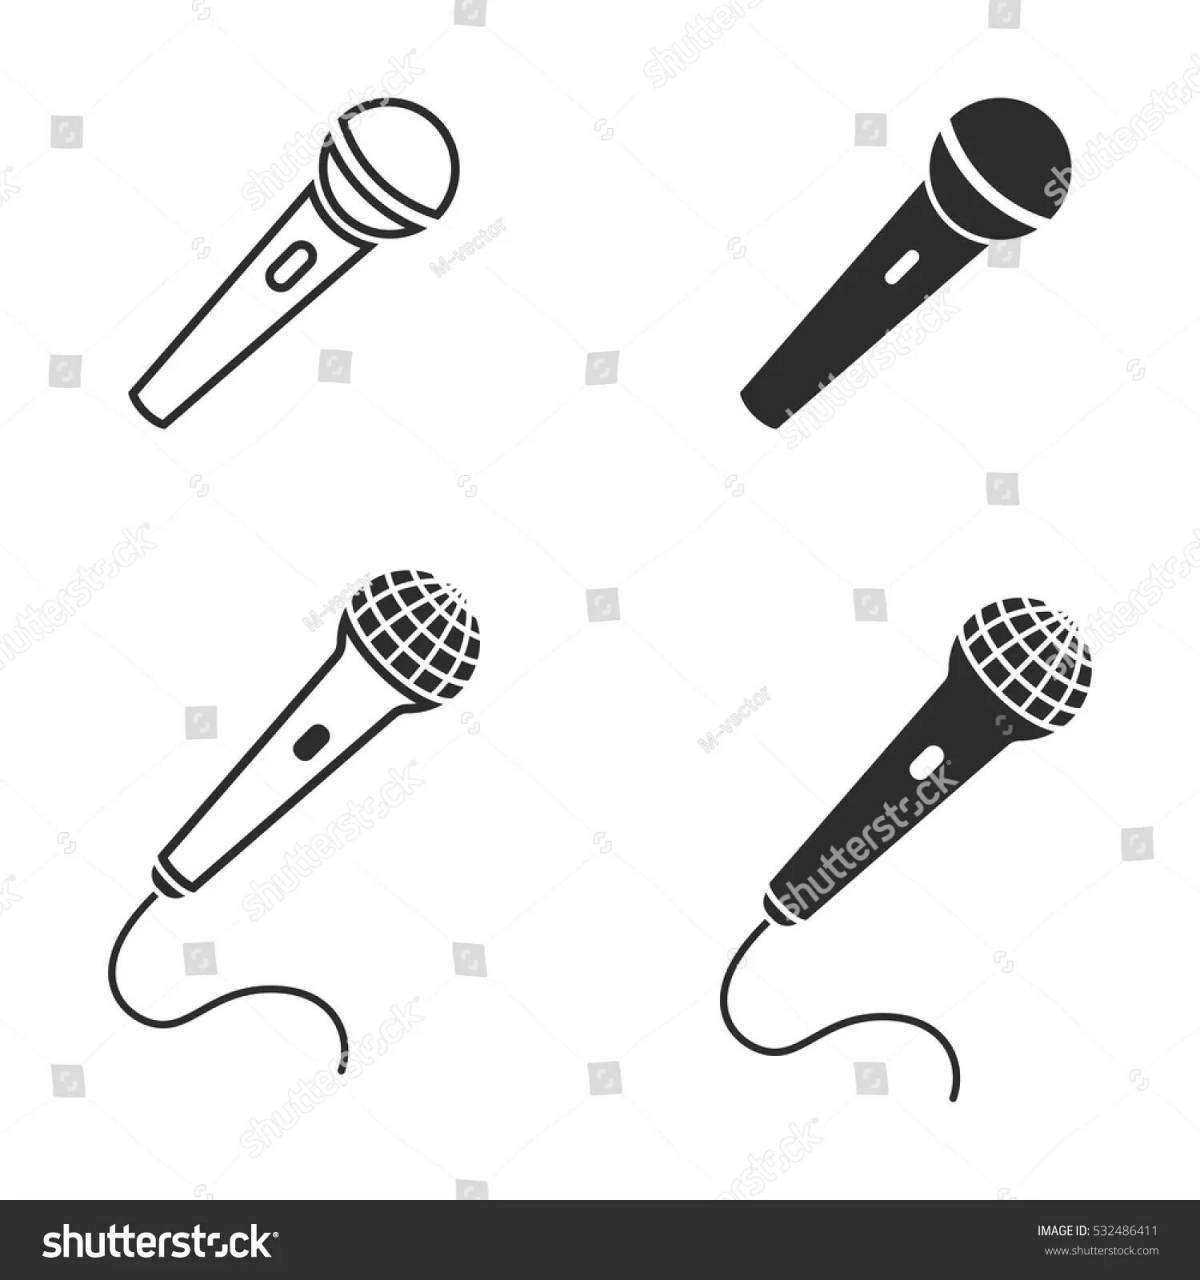 Great microphone coloring page for kids